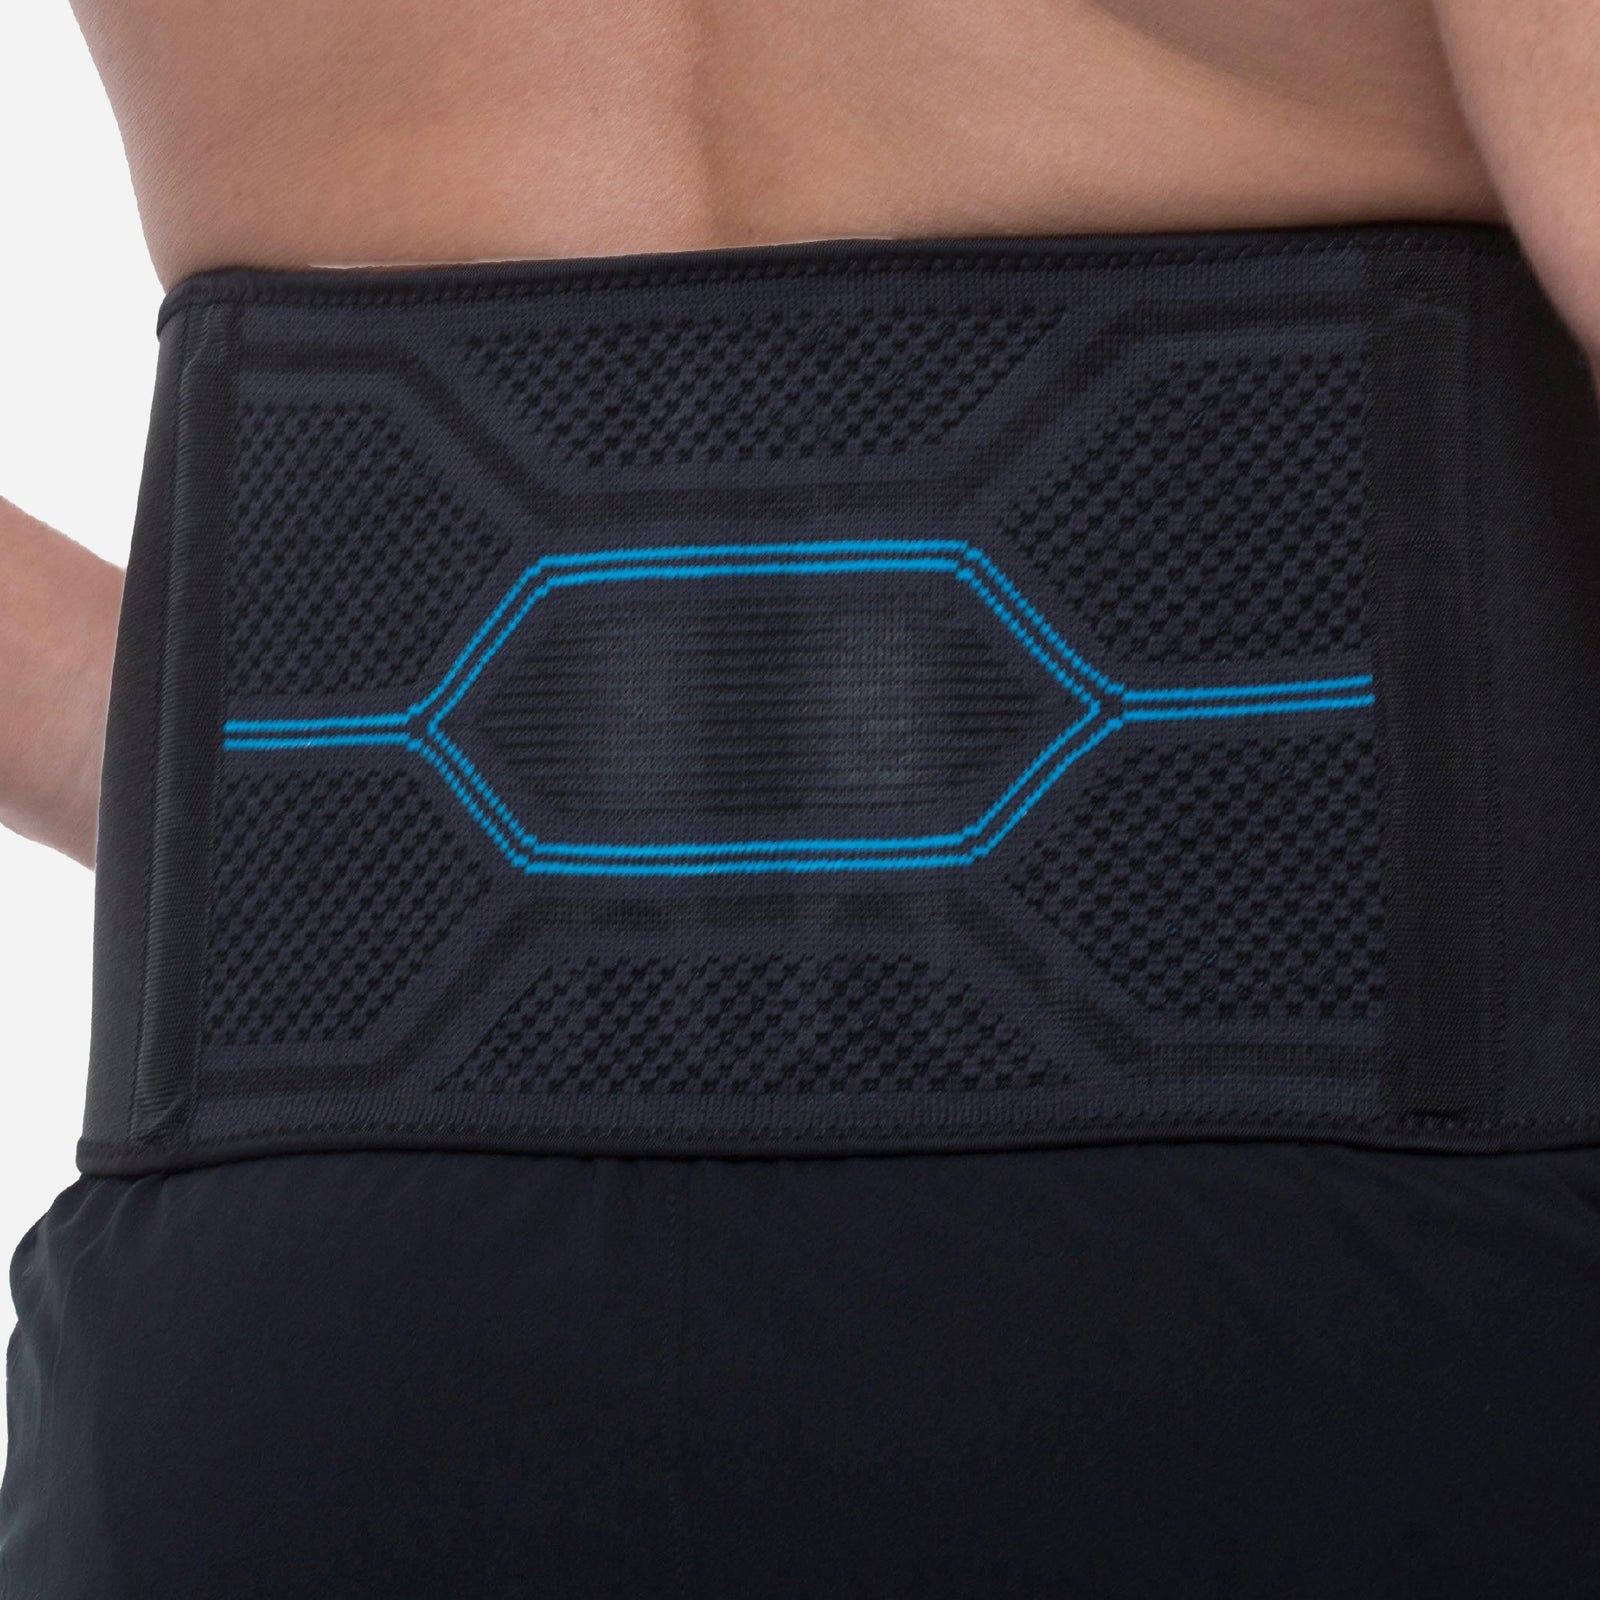 ABS Copper Fit Men's Rapid Relief Back Support Brace With Hot/cold Therapy